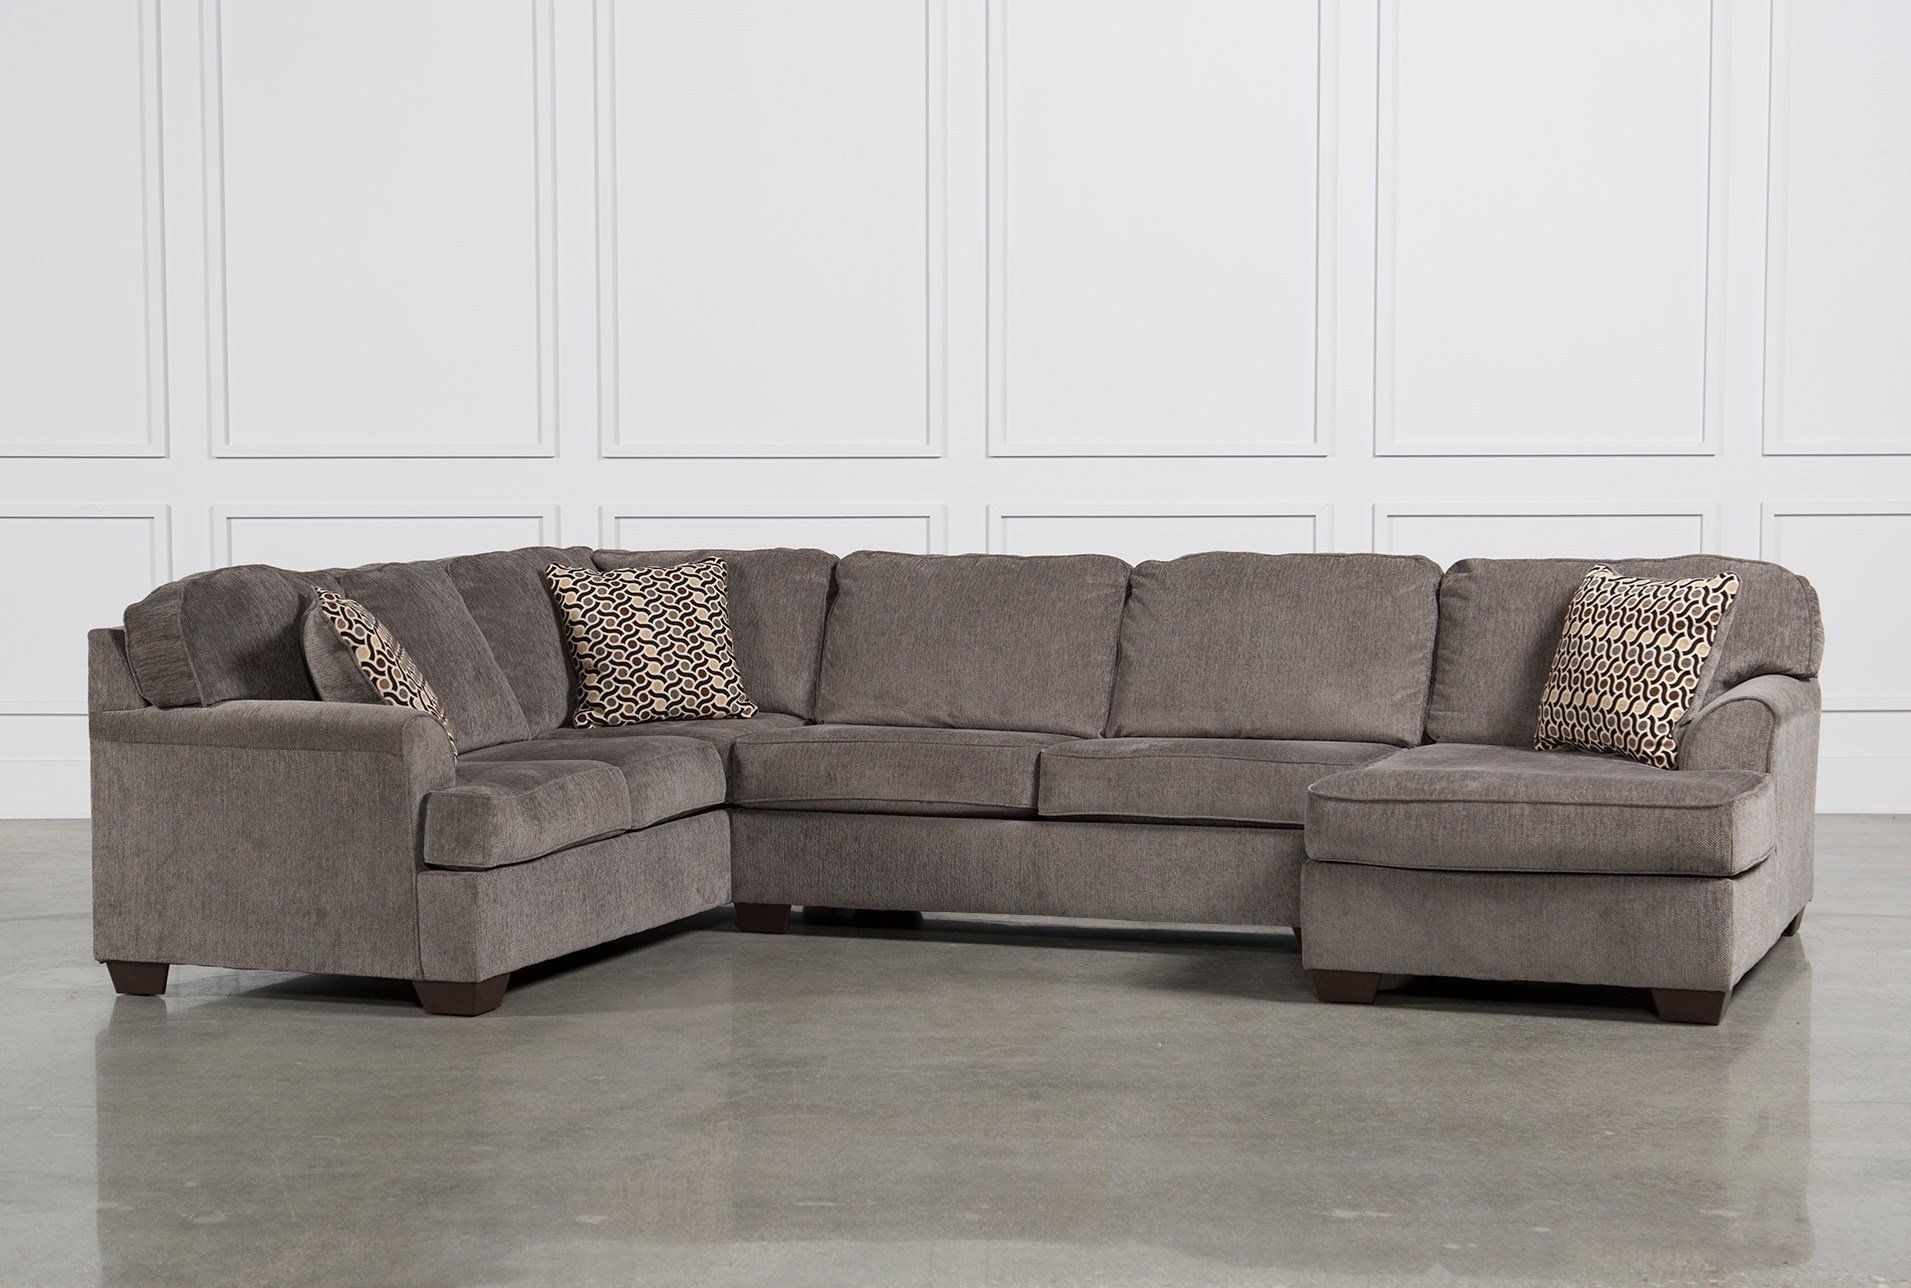 Loric Smoke 3 Piece Sectional W/raf Chaise | Upholstery, Pillows And Within Meyer 3 Piece Sectionals With Raf Chaise (View 7 of 30)